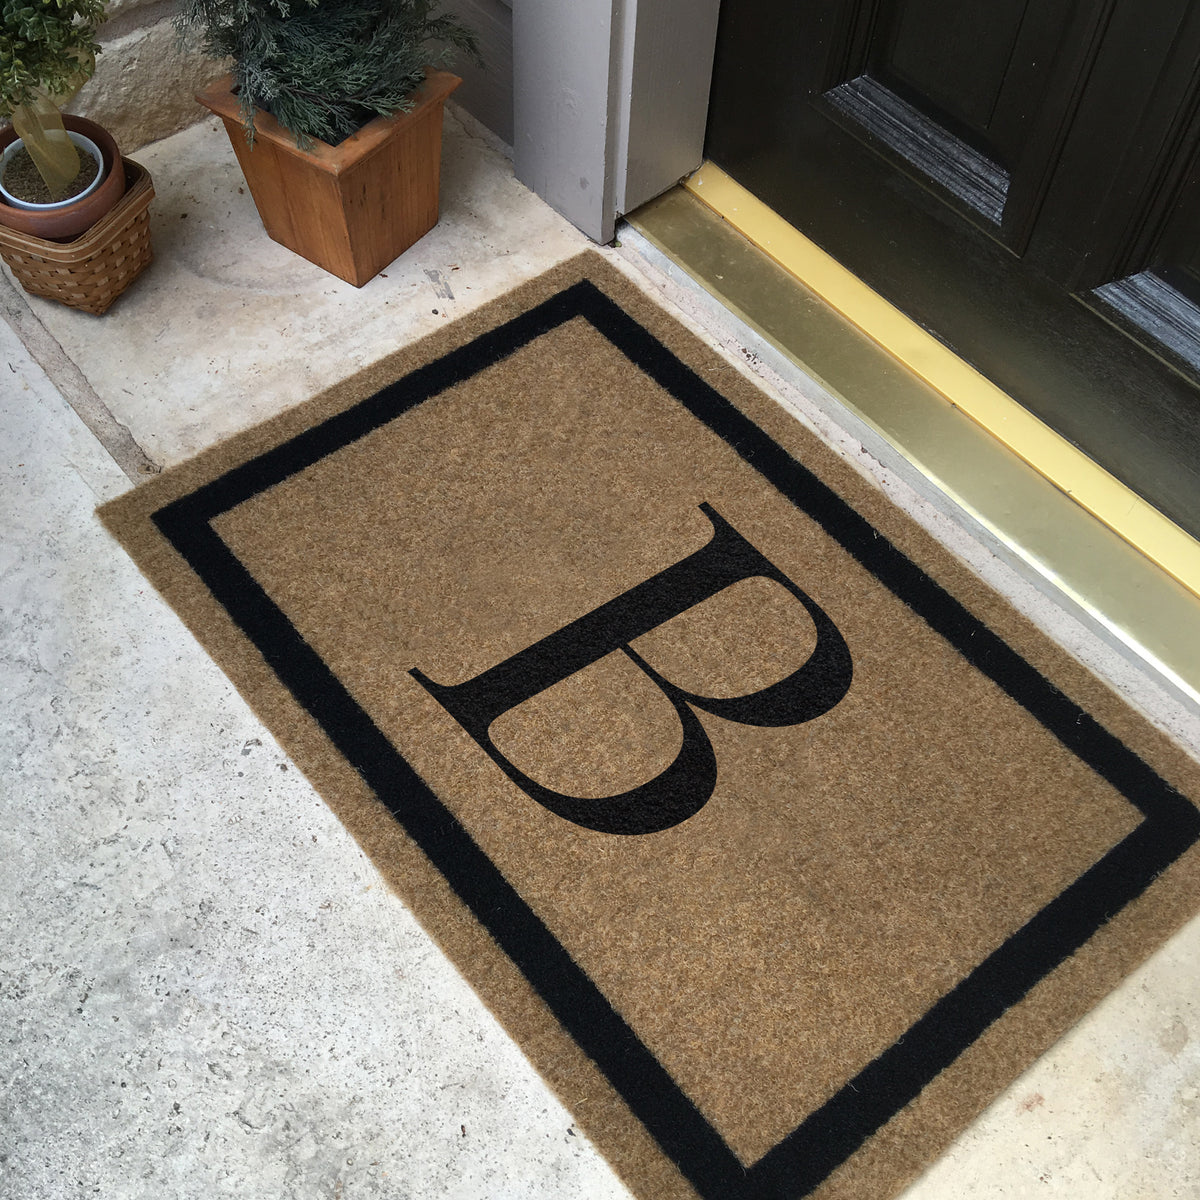 Infinity Custom Mats™ All-Weather Personalized Door Mat - STYLE: FARMHOUSE MONOGRAM COLOR:TAN - rugsthatfit.com